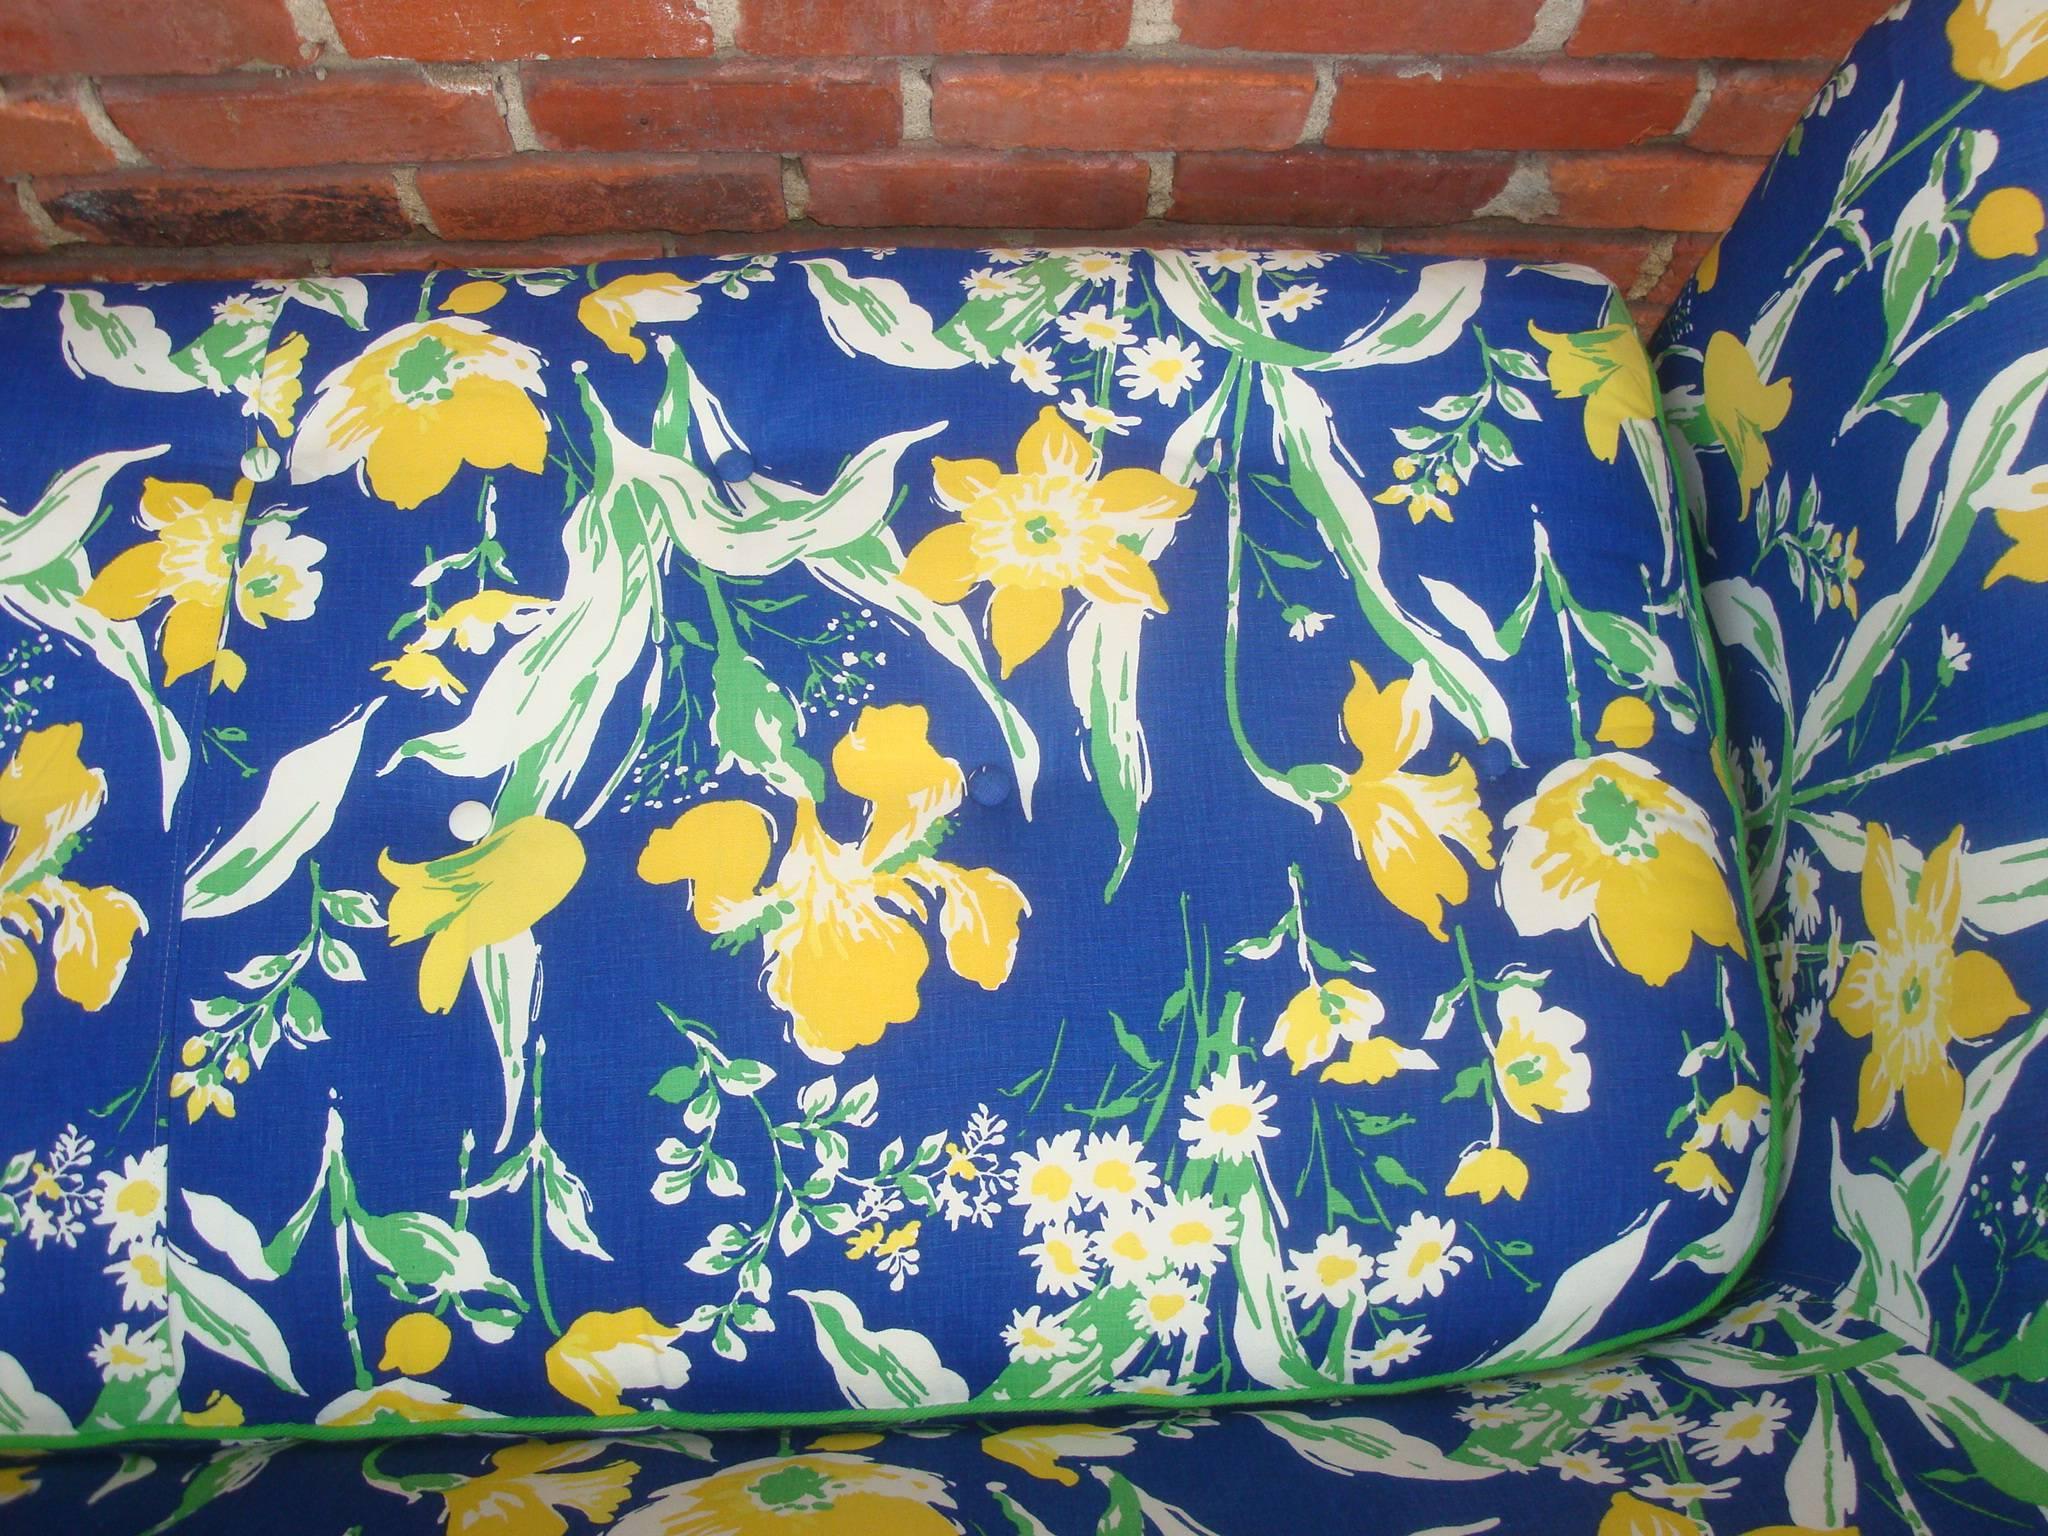 American 1970s Blue and Yellow Floral Motif Sofa by Highland House of Hickory